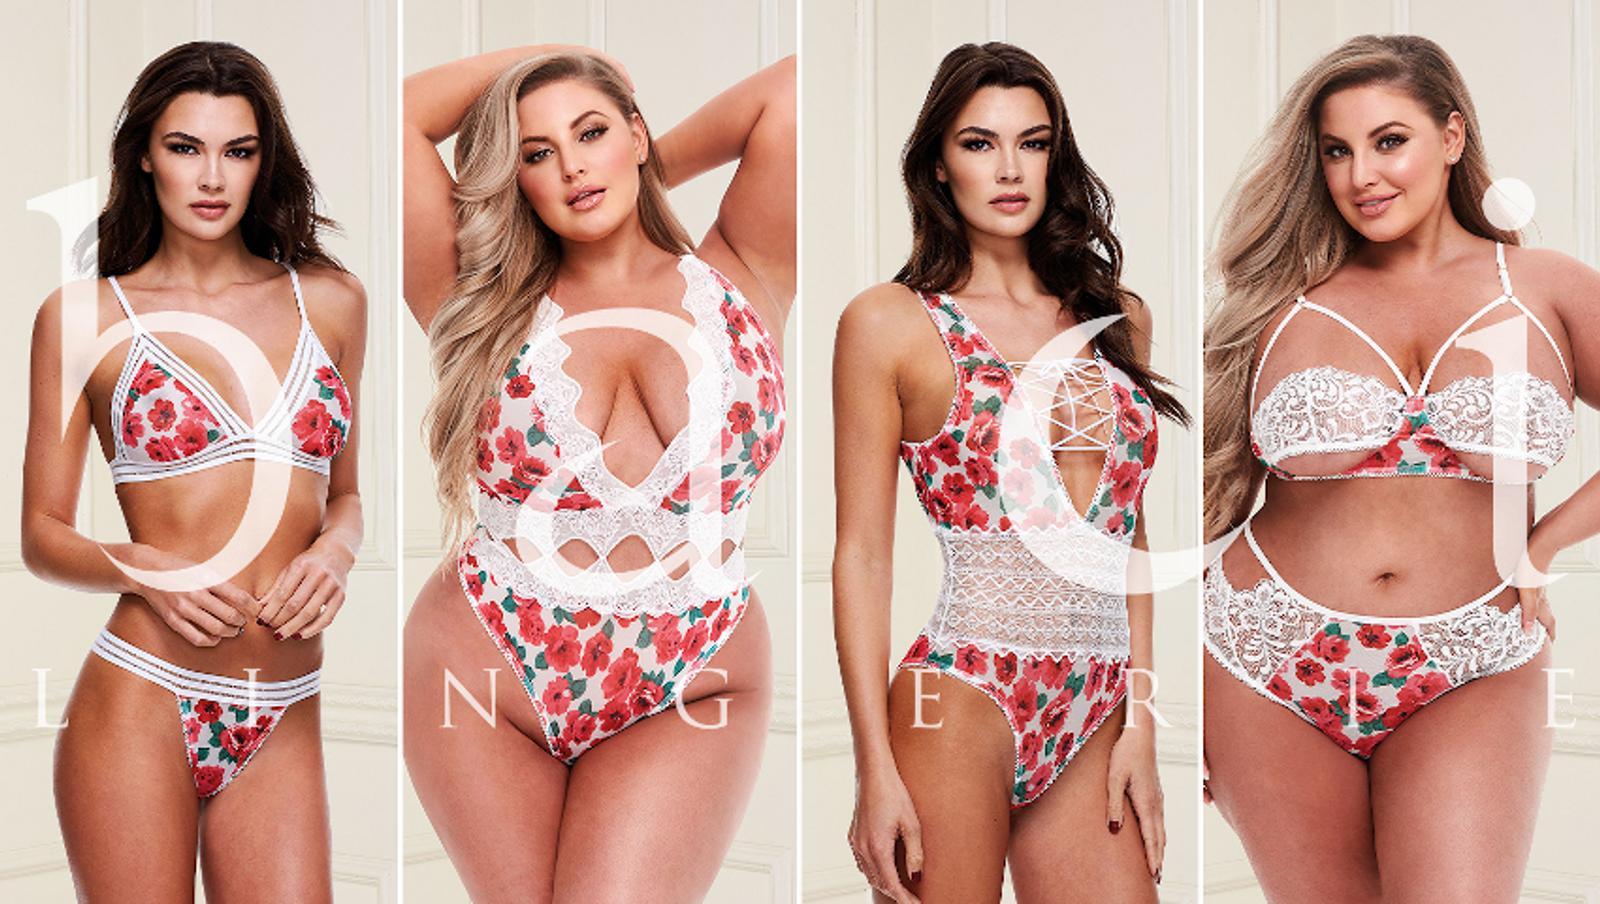 XGen Products Now Shipping Floral Styles From Baci Lingerie